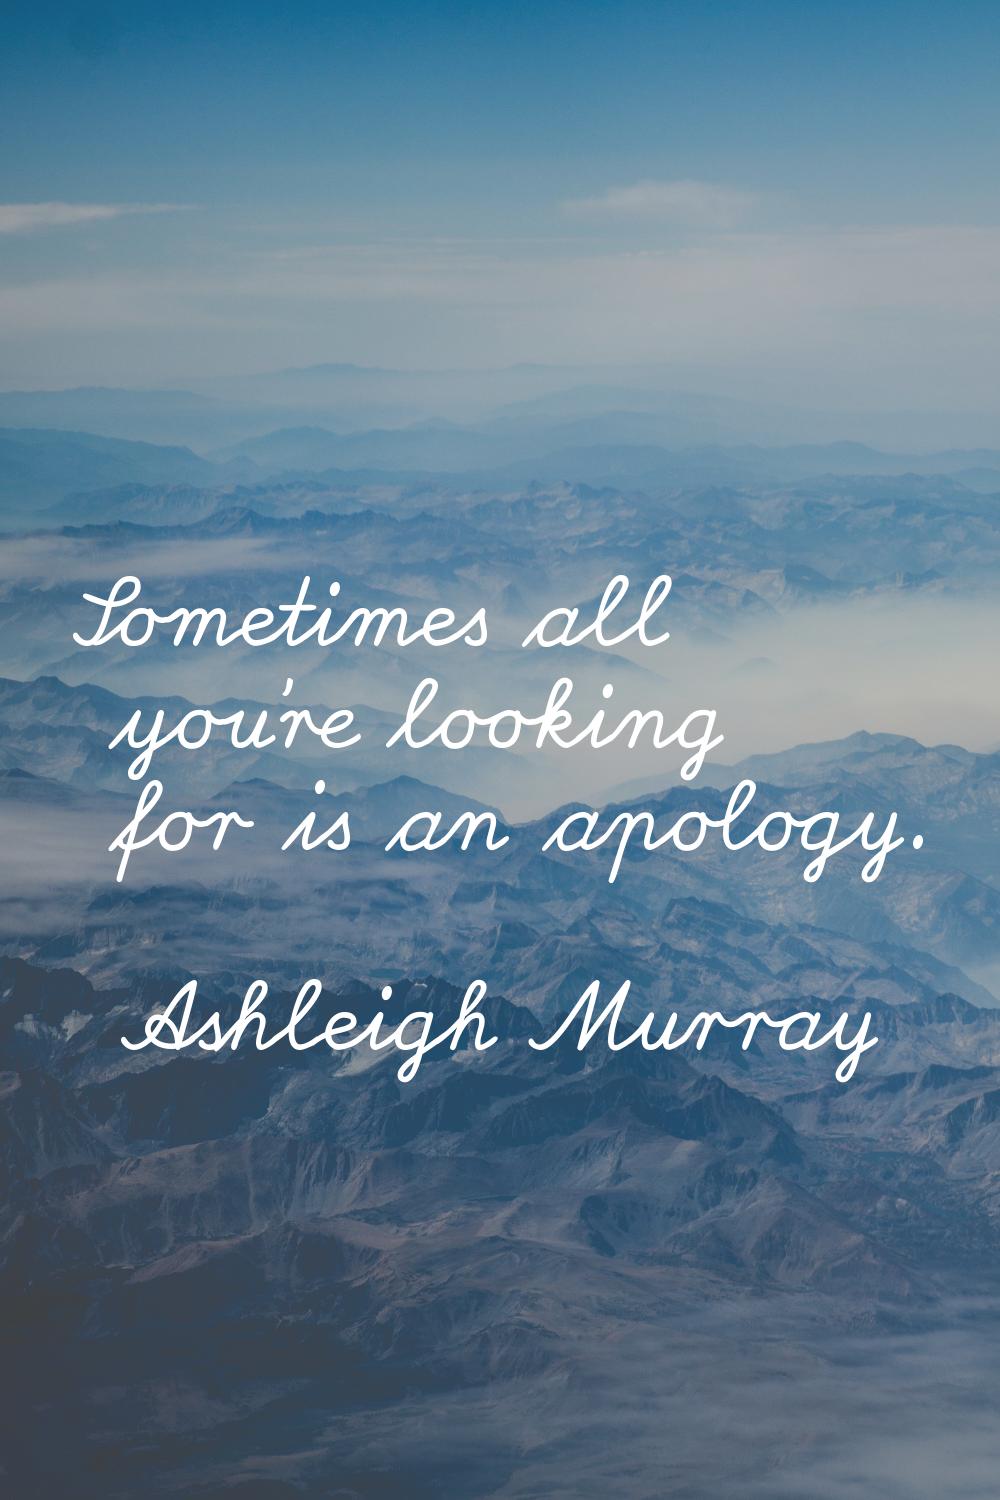 Sometimes all you're looking for is an apology.